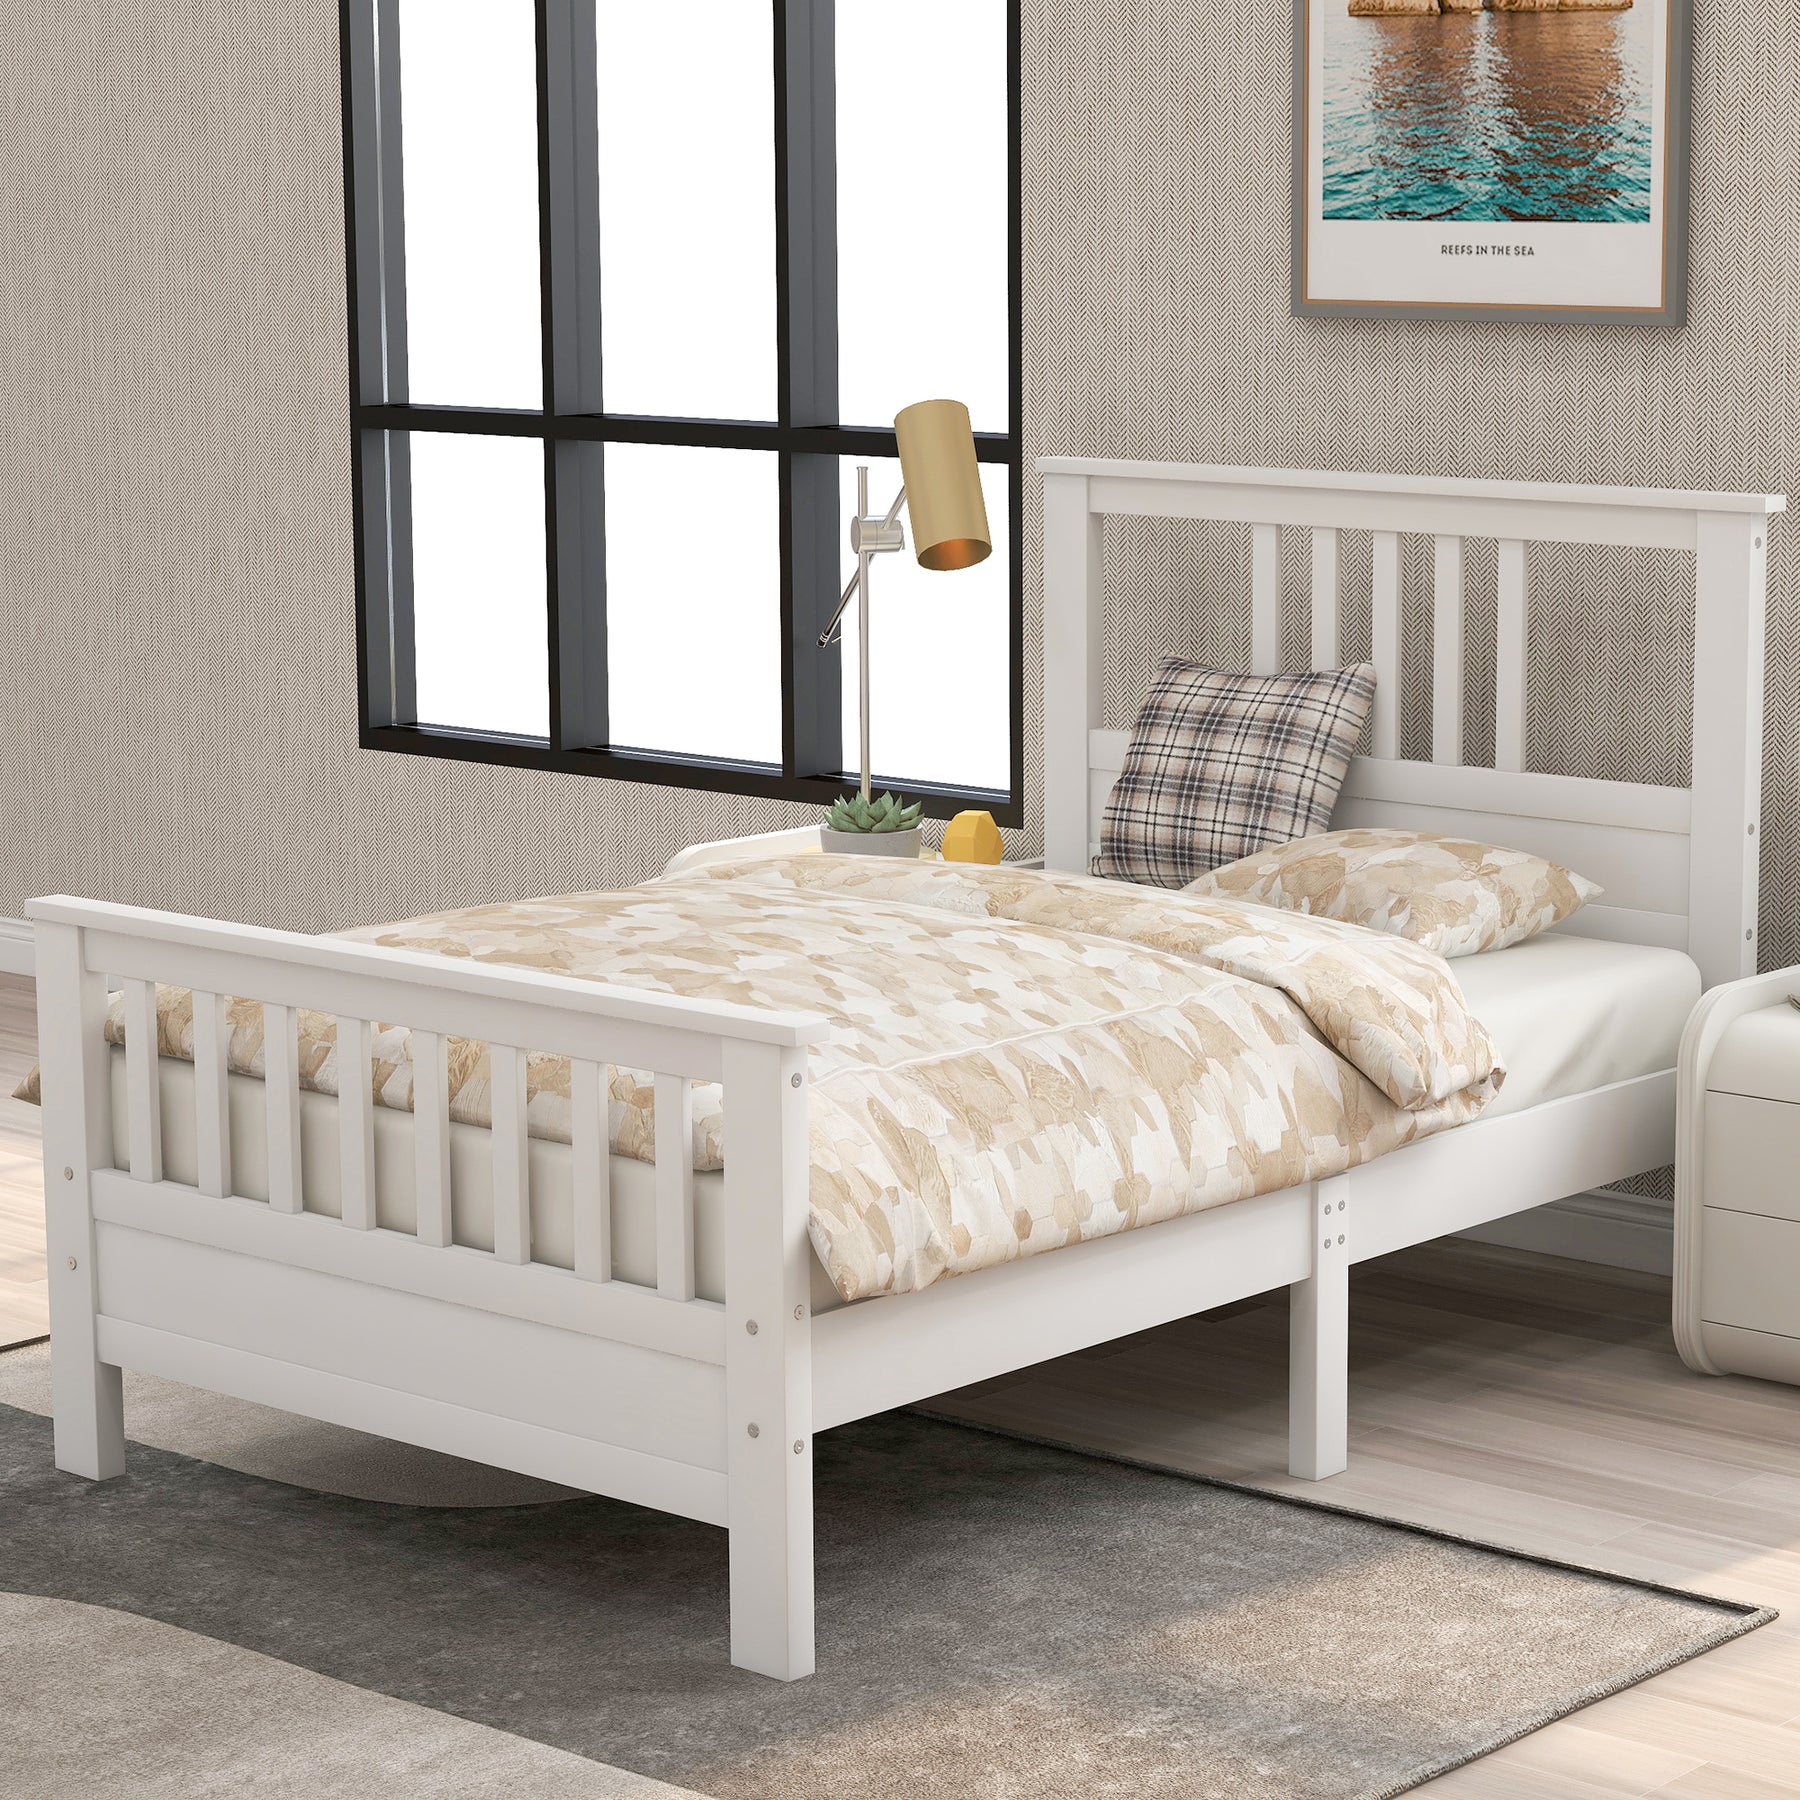 Wood Platform Bed with Headboard and Footboard, Twin (White) - Tonkn